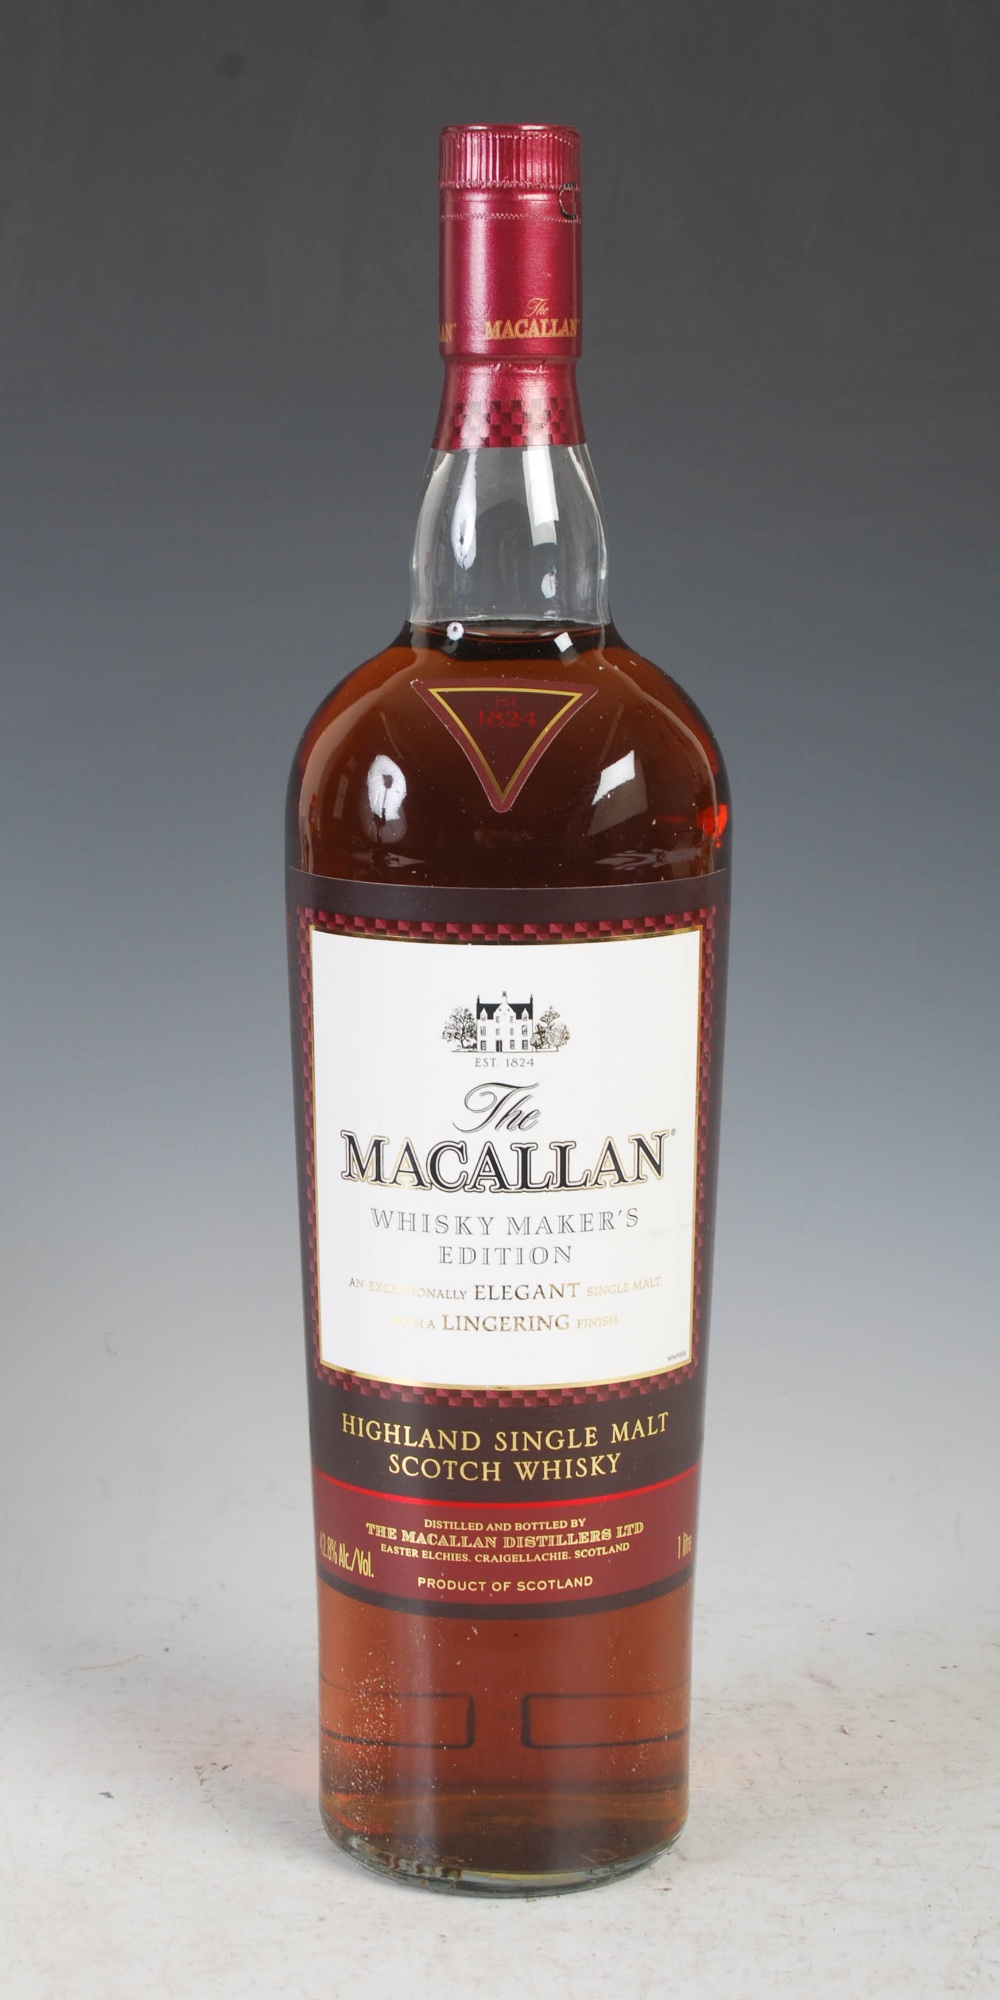 A boxed bottle of The Macallan Whisky Maker's Edition, Highland Single Malt Scotch Whisky, 42.8% - Image 2 of 5